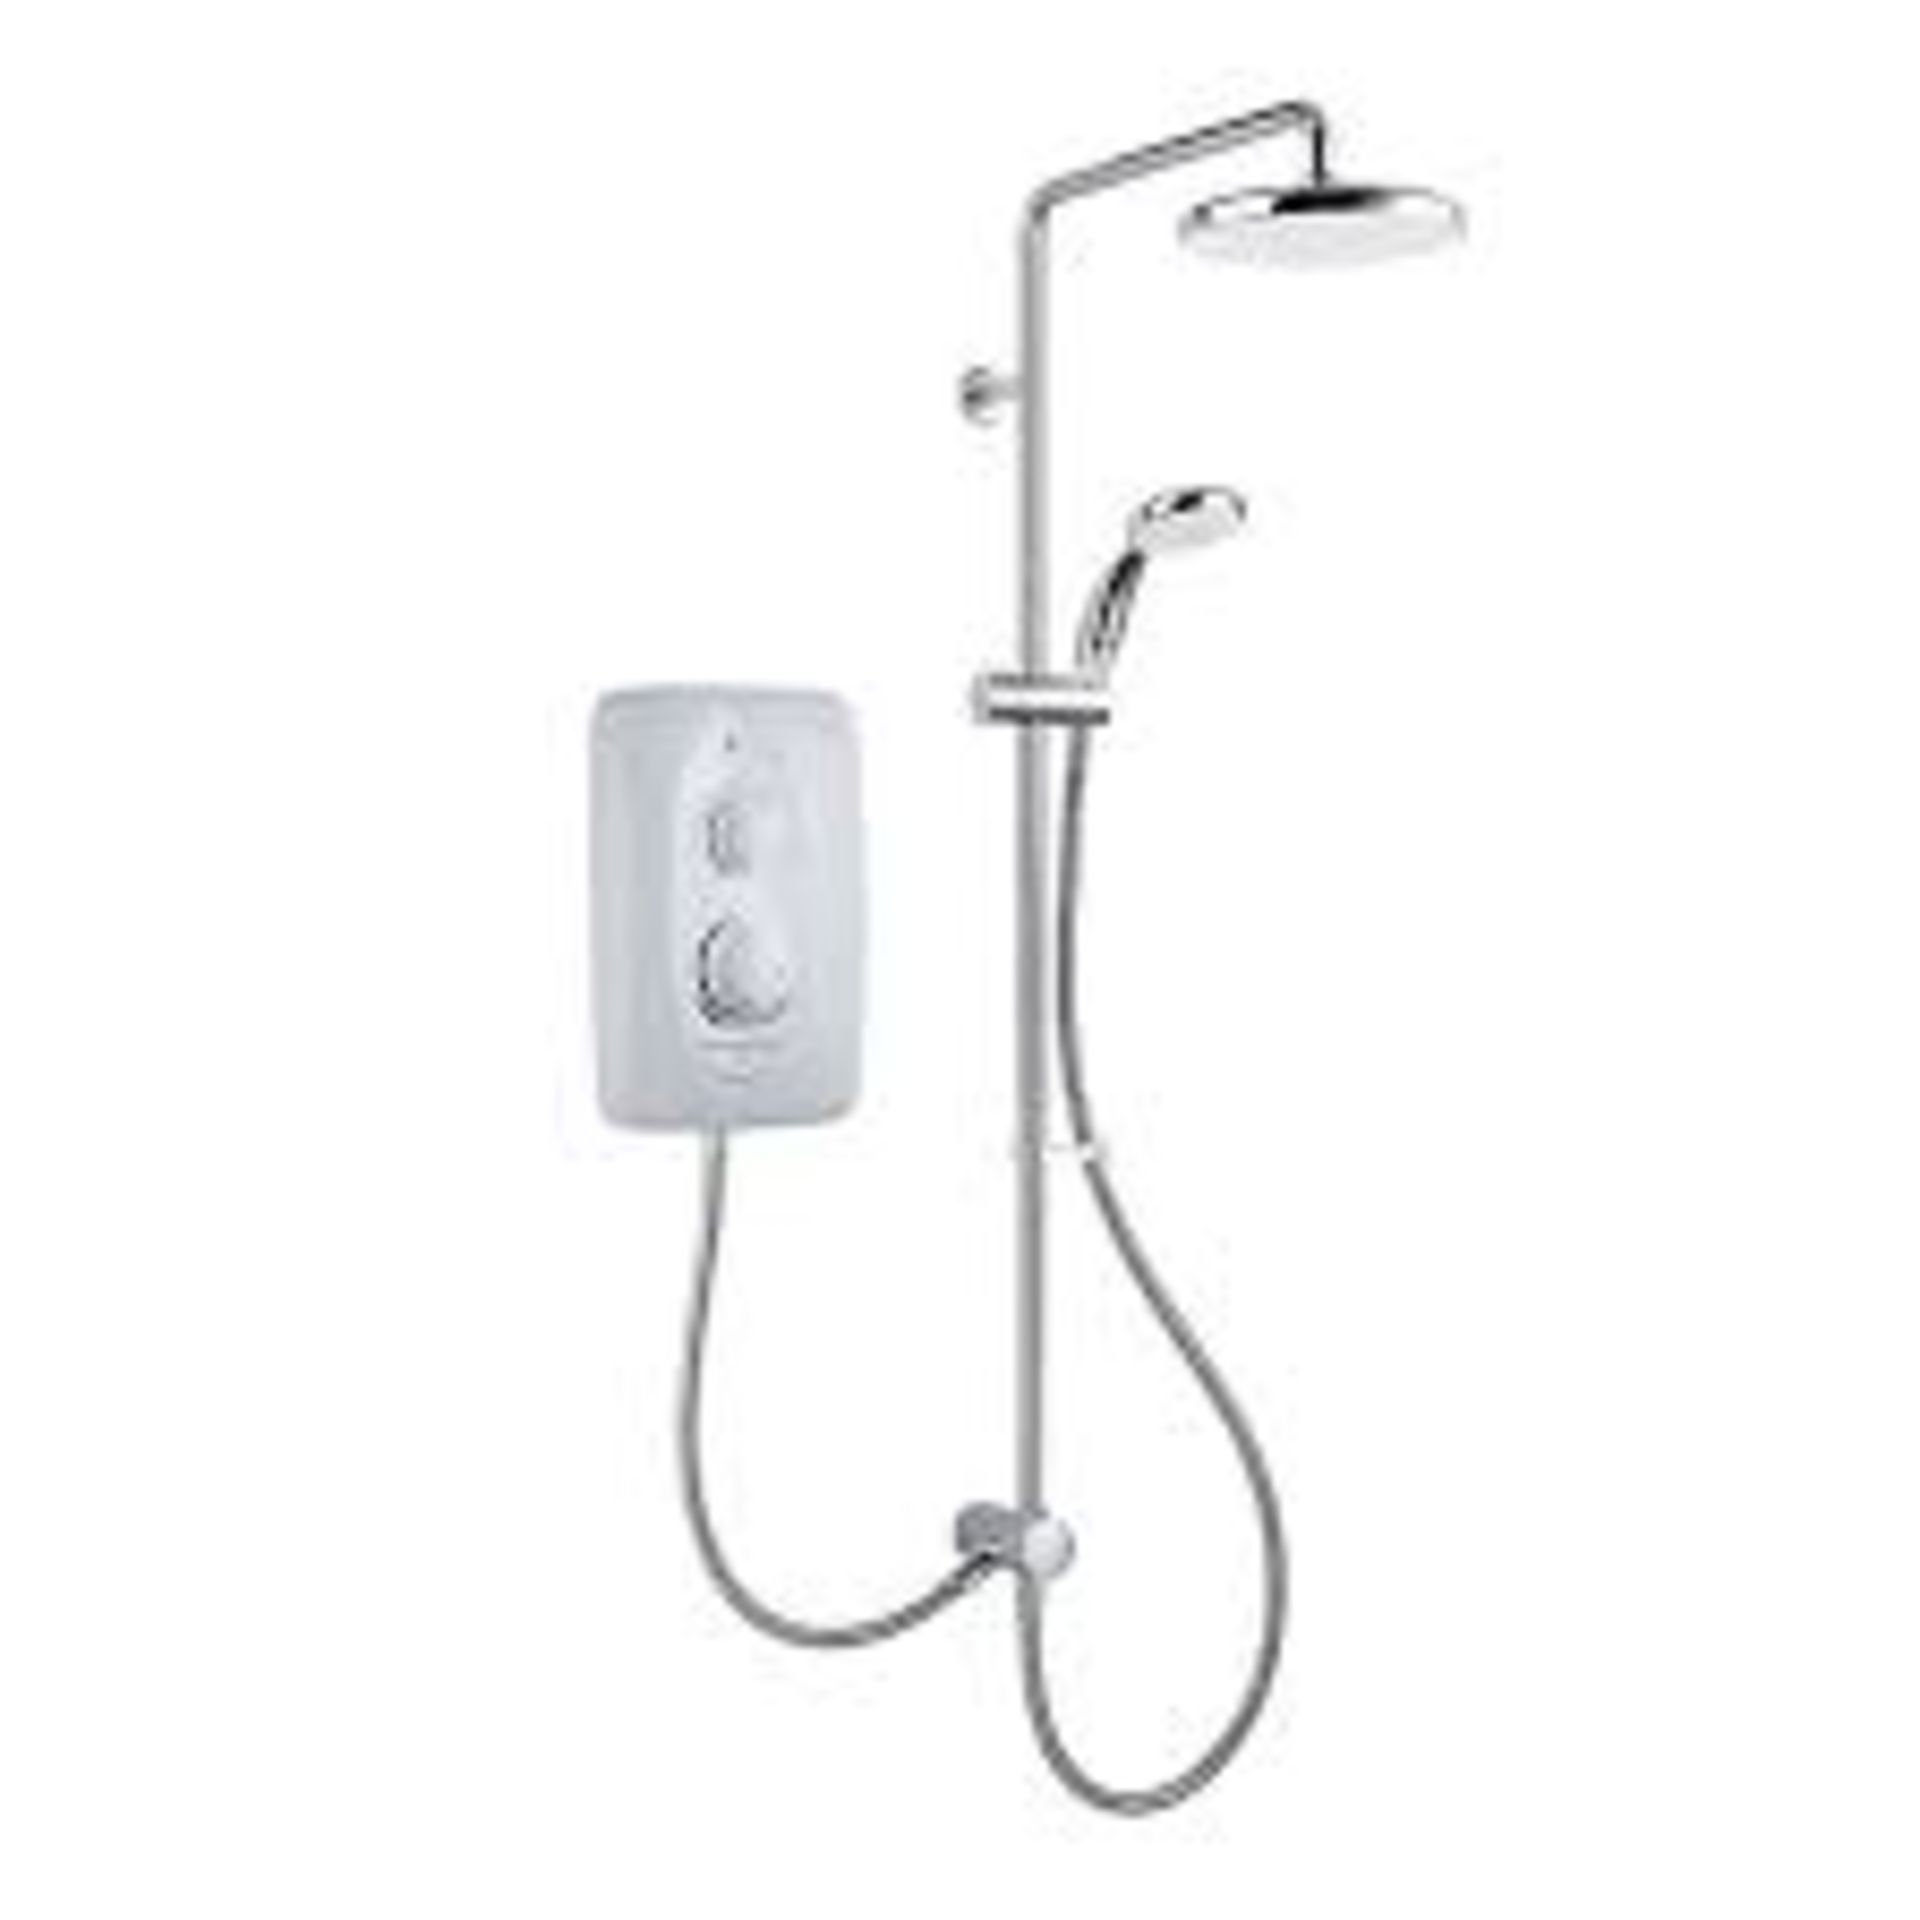 Mira Sprint dual White Chrome effect Electric Shower, 10.8kW. - SR4. Mira Sprint Multi-Fit™ offers a